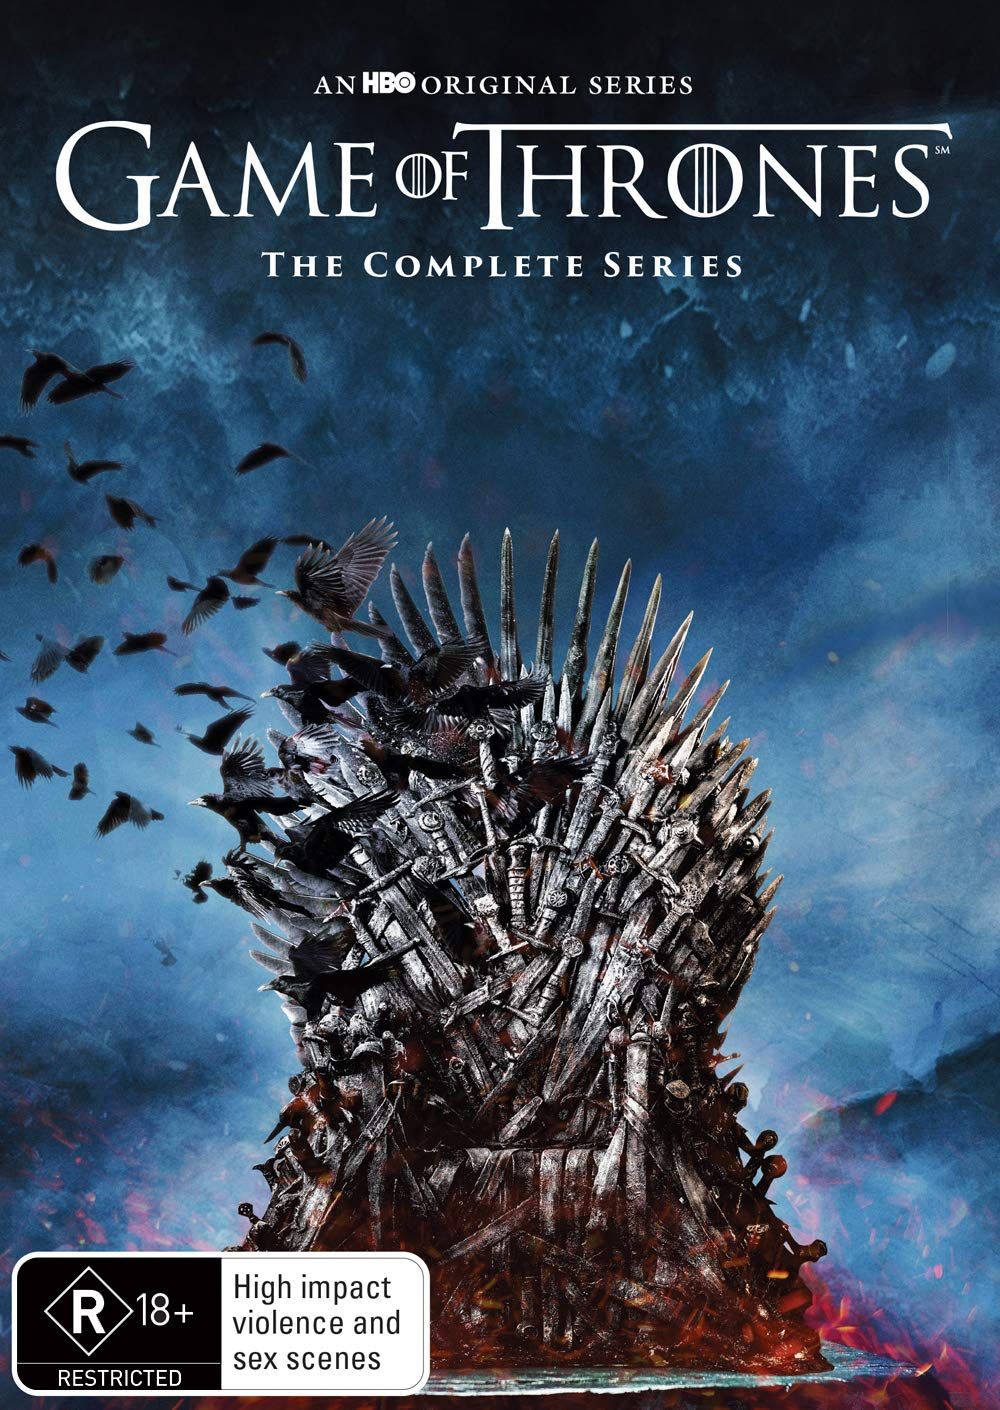 Game of Thrones best DVD sets